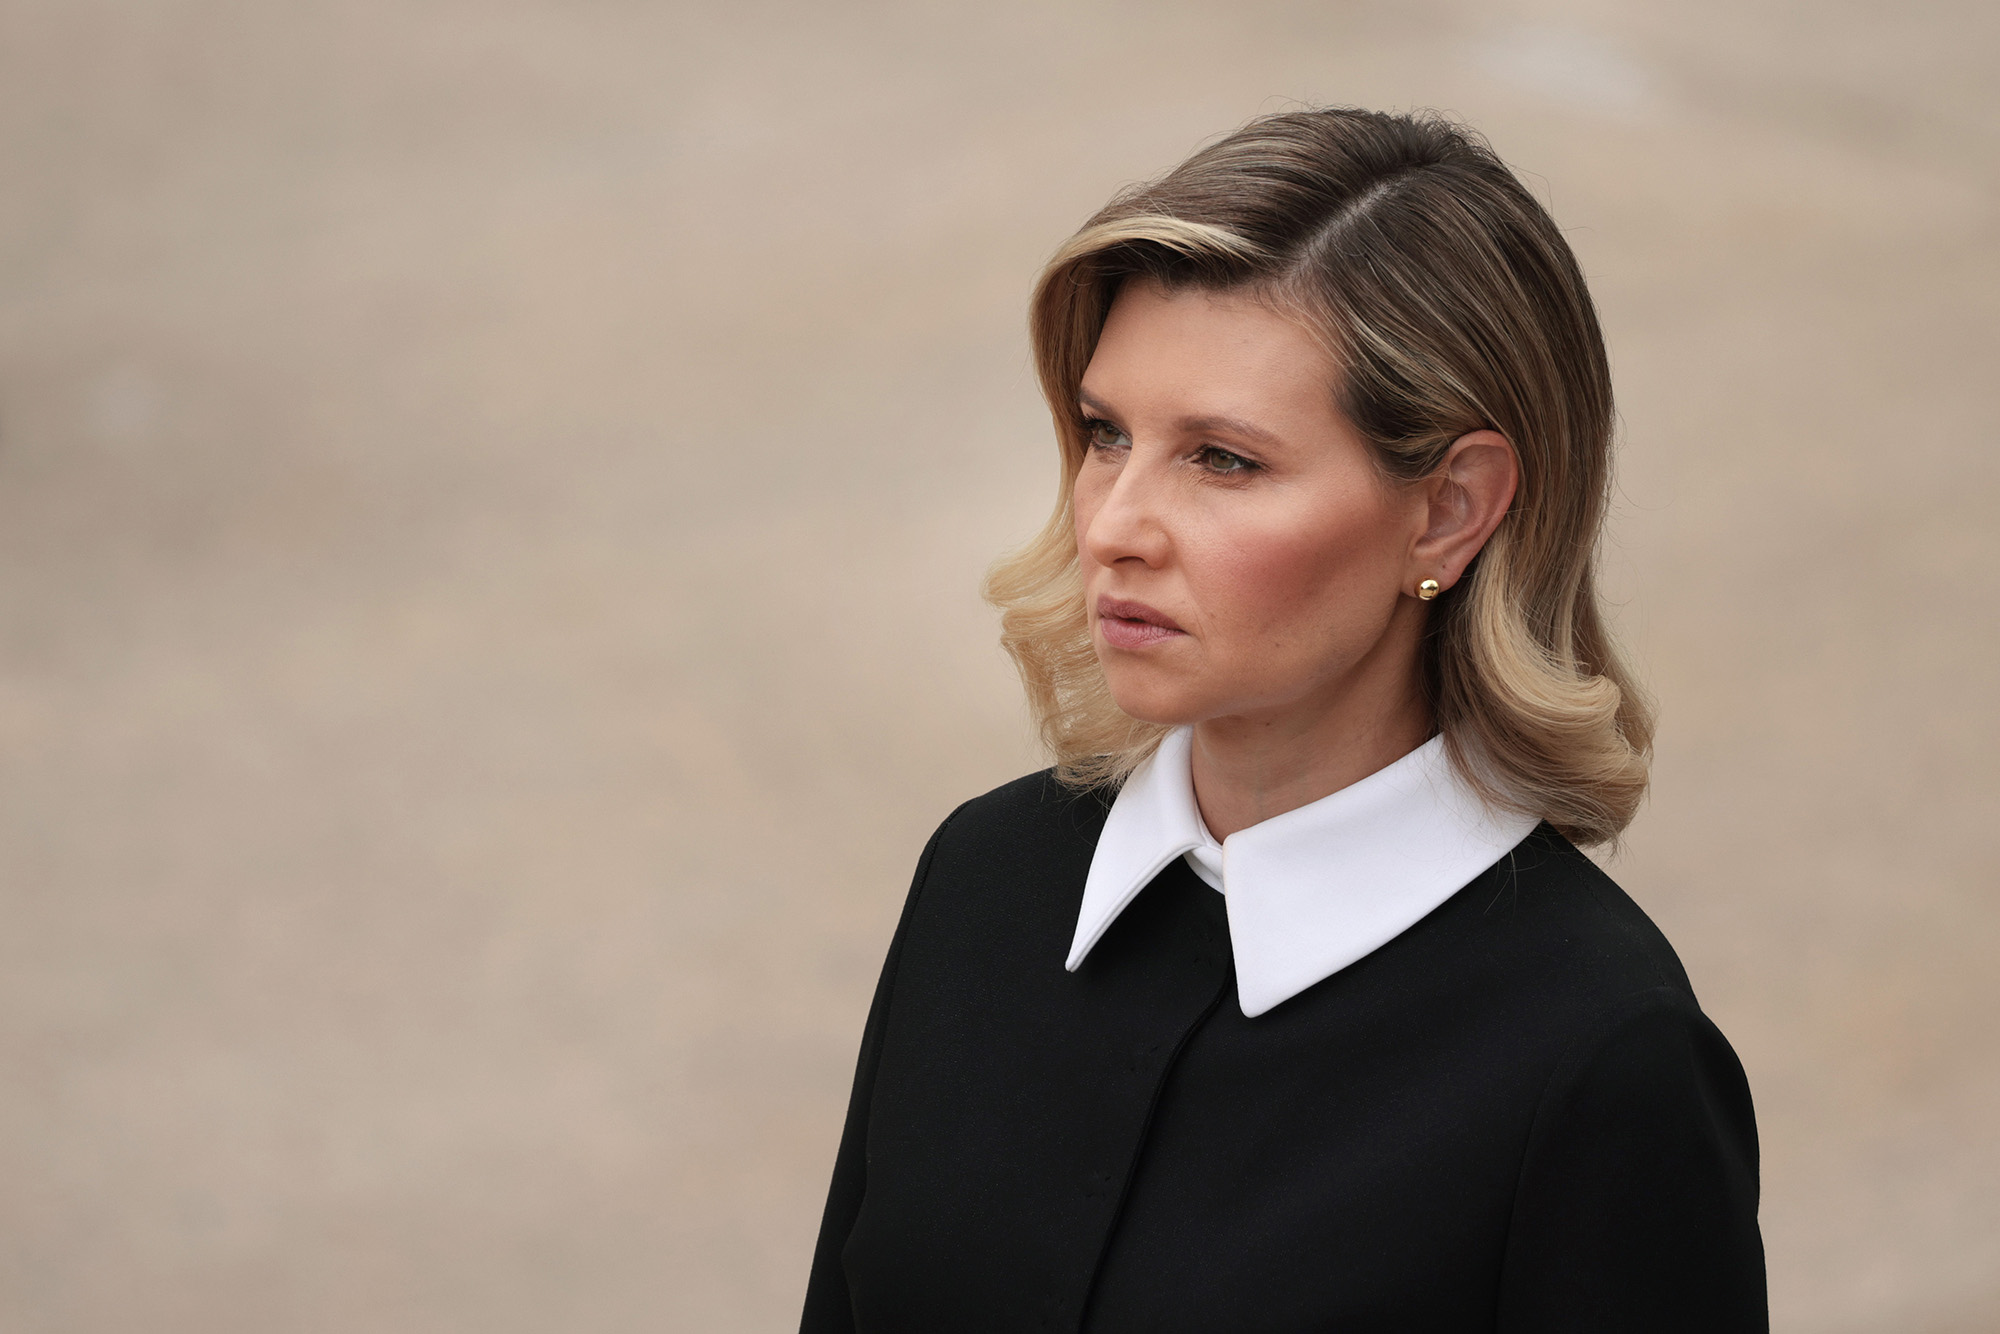 Ukraine's first lady, Olena Zelenska, is seen during a wreath laying ceremony at the Tomb of the Unknown Soldier at Arlington National Cemetery in Arlington, Virginia on September 1, 2021.